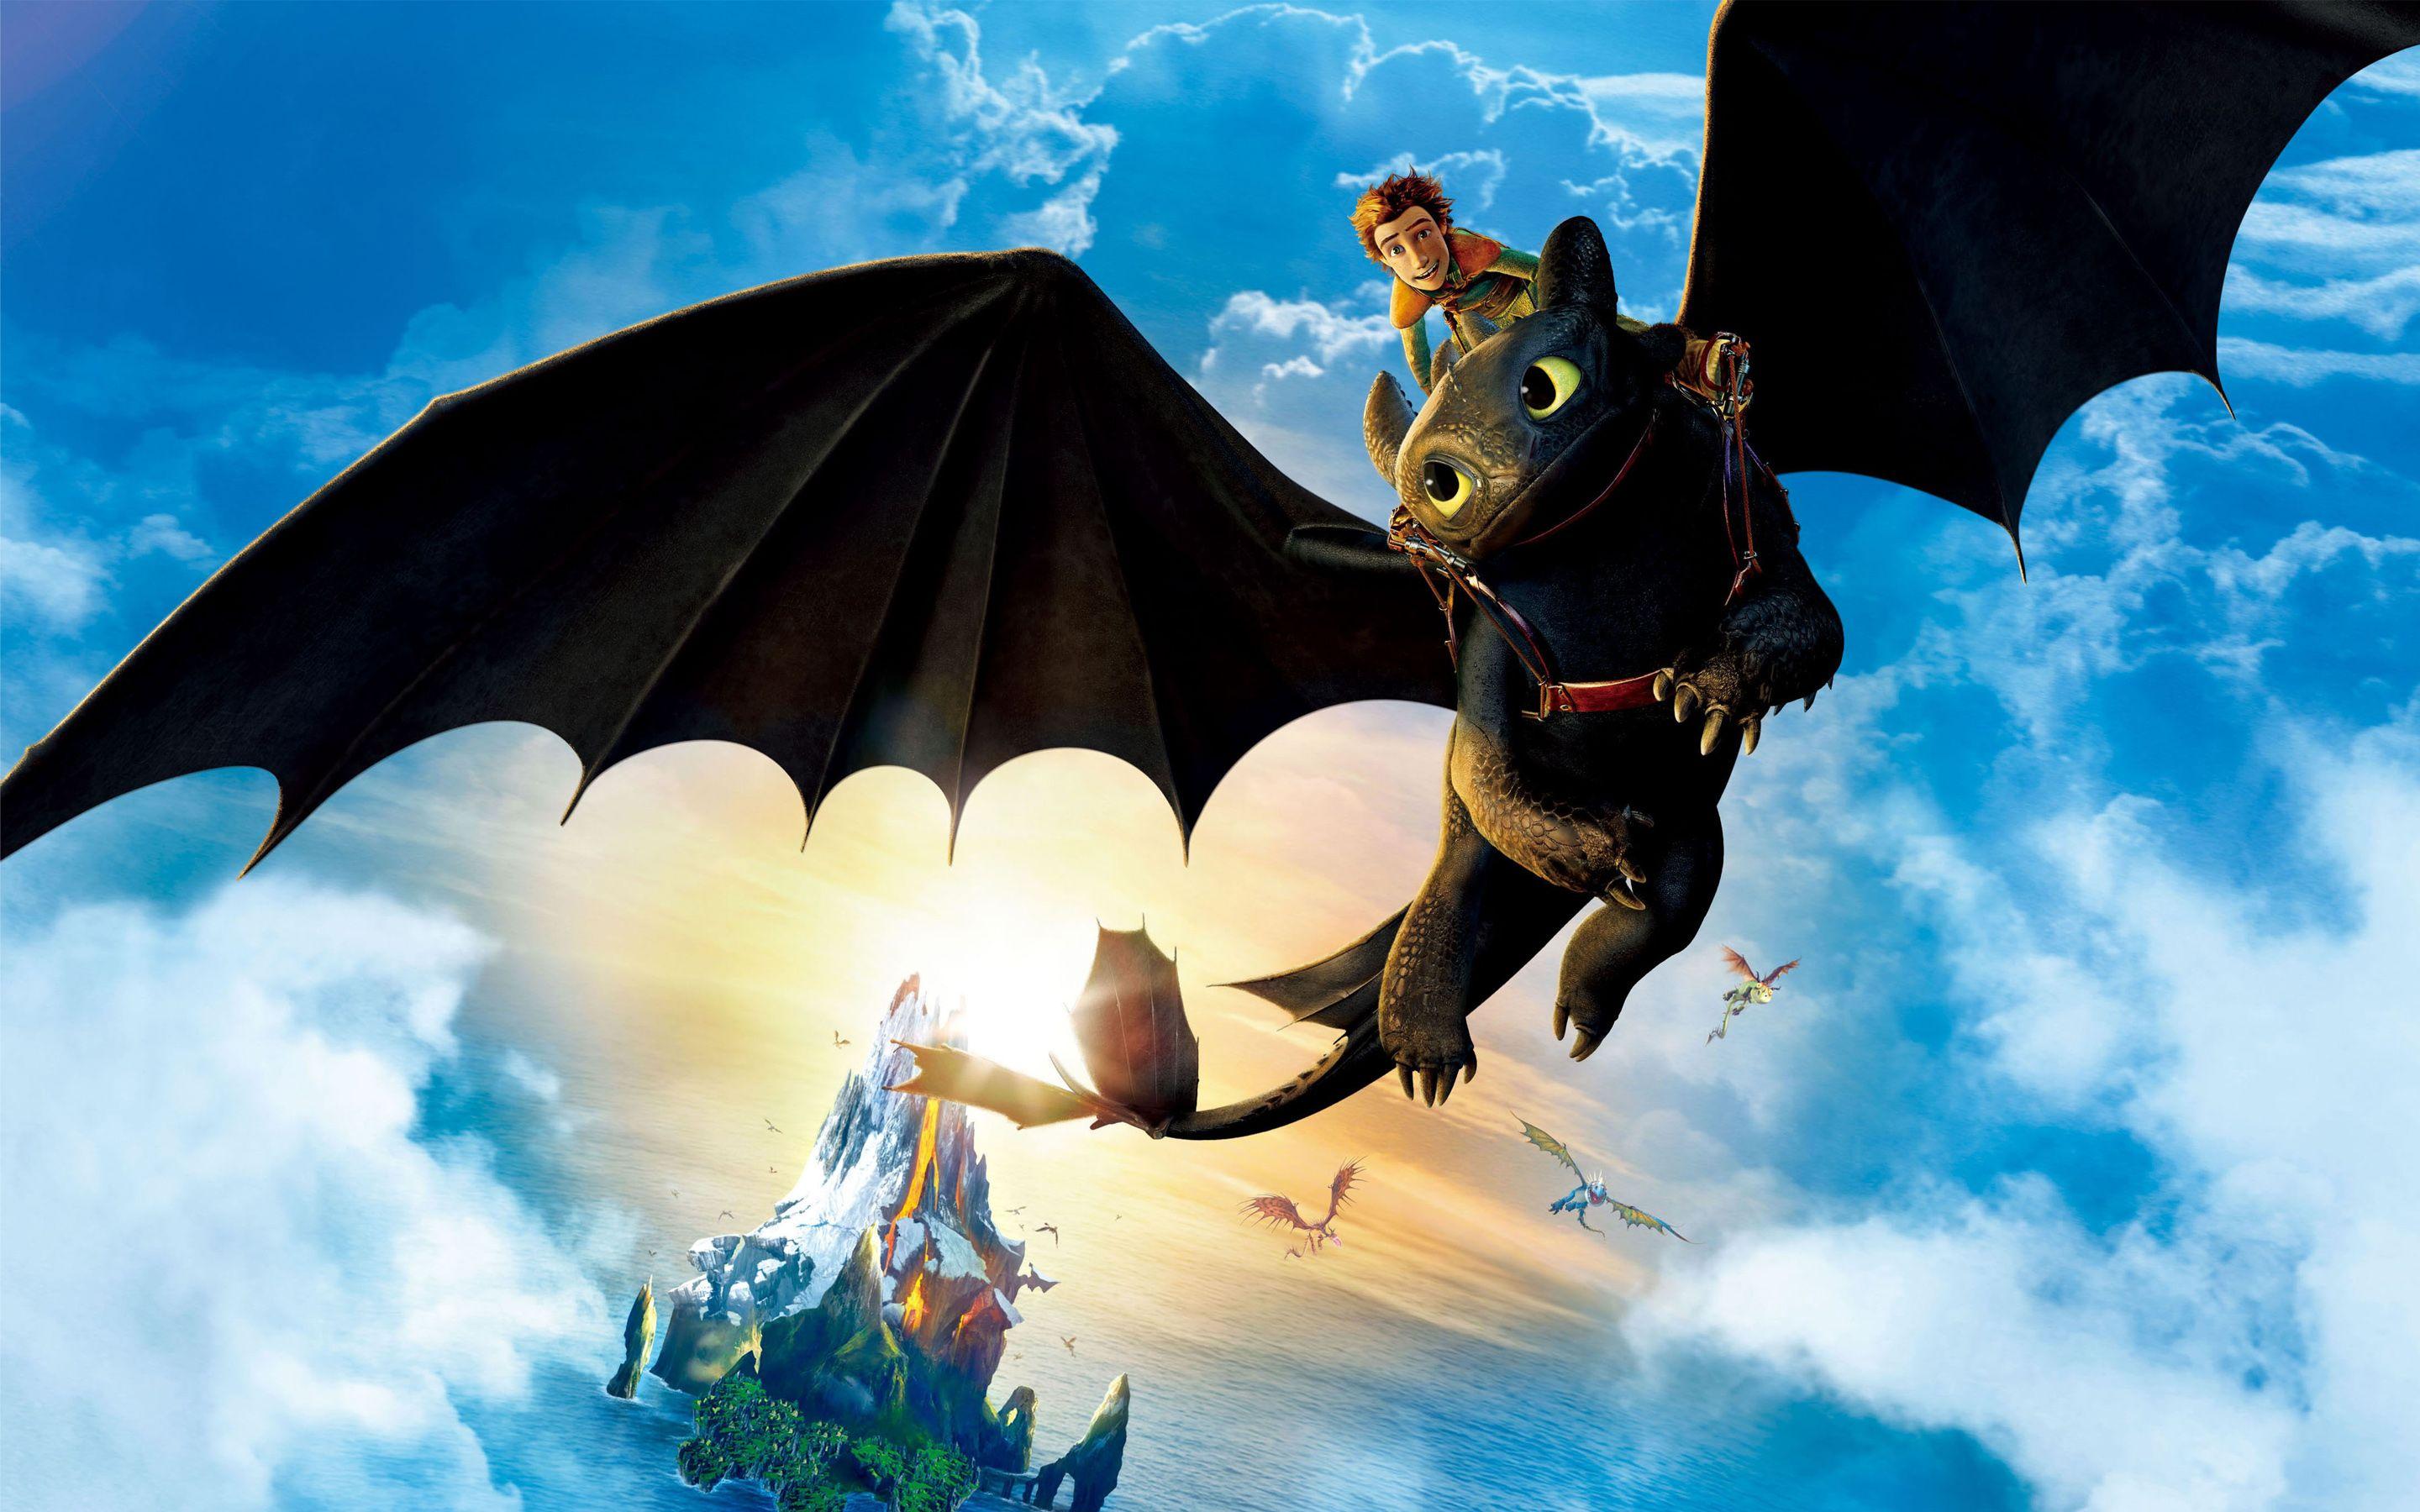 Movies Hiccup Riding Toothless wallpaper Desktop, Phone, Tablet